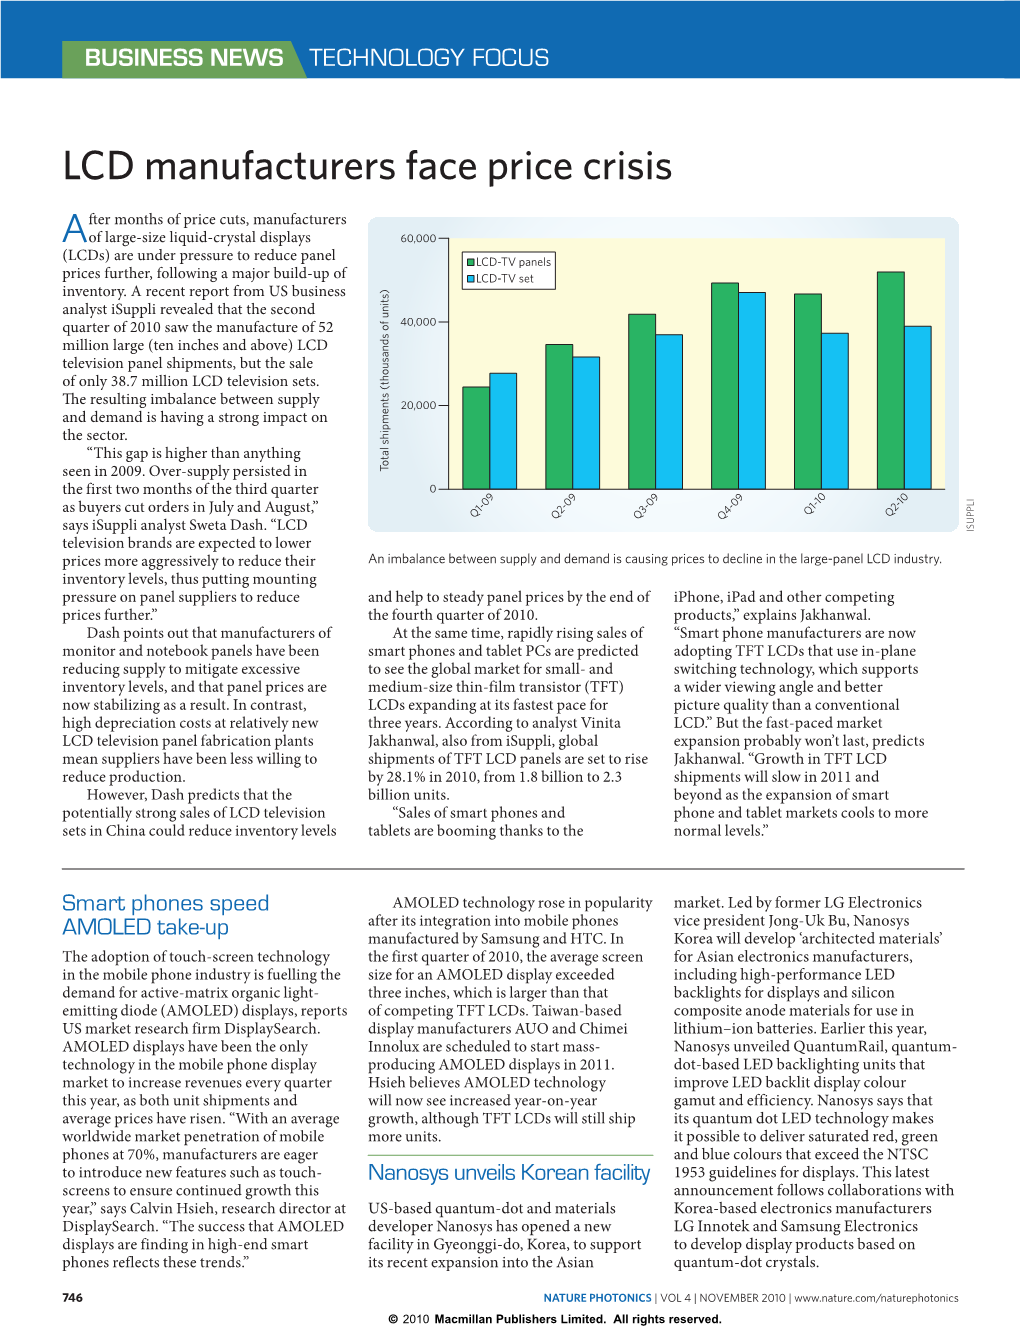 LCD Manufacturers Face Price Crisis